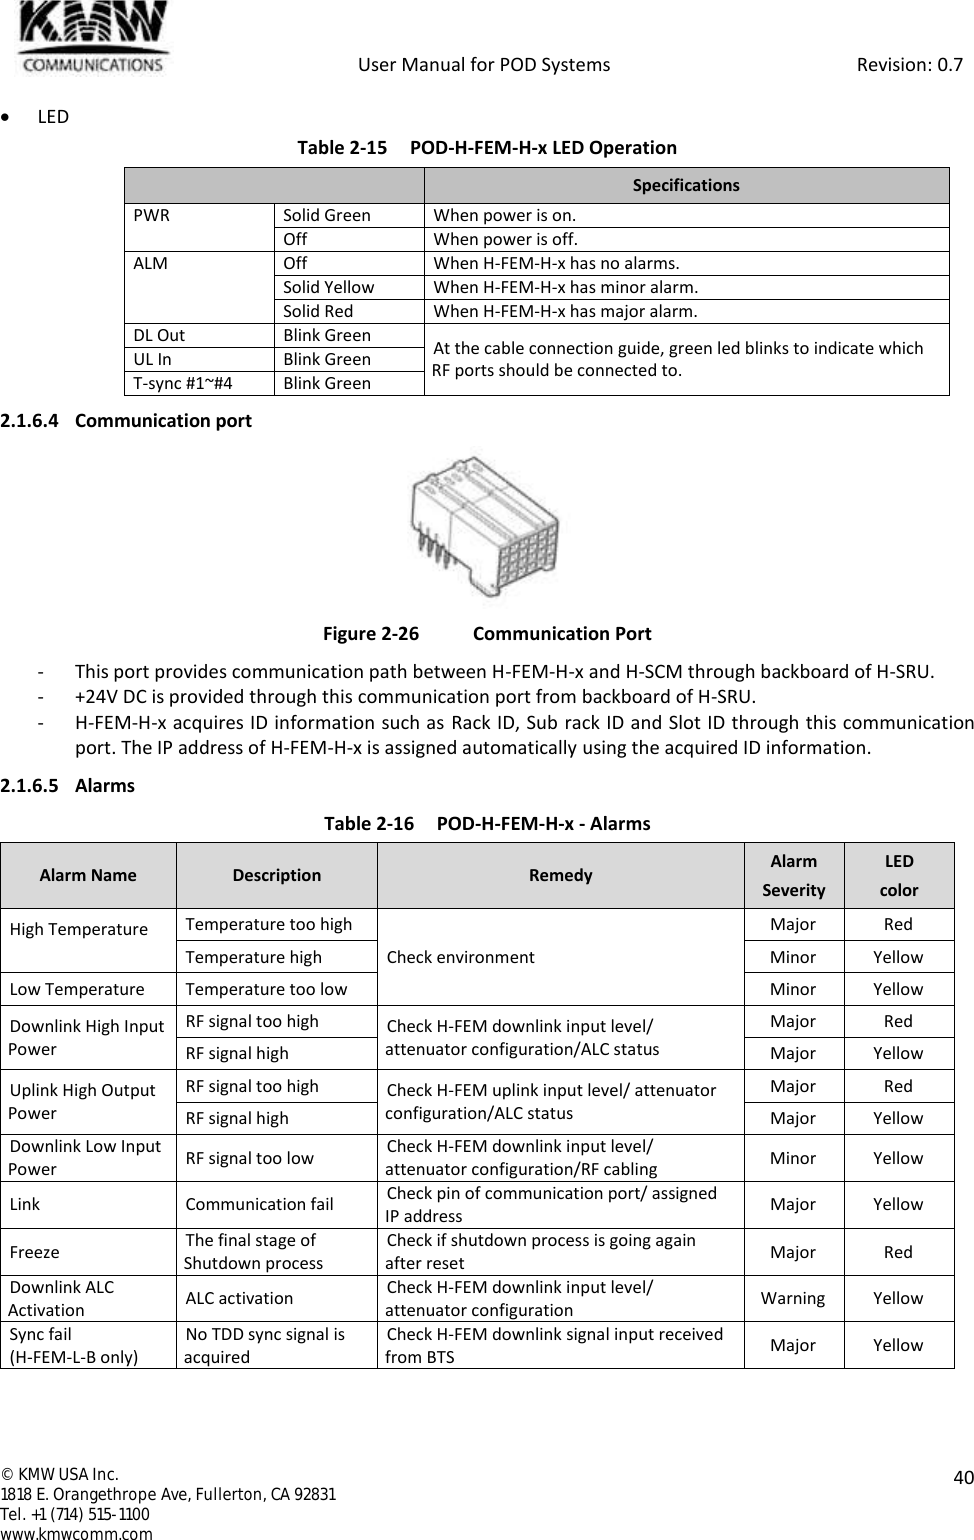            User Manual for POD Systems                                                     Revision: 0.7  ©  KMW USA Inc. 1818 E. Orangethrope Ave, Fullerton, CA 92831 Tel. +1 (714) 515-1100 www.kmwcomm.com  40   LED Table 2-15 POD-H-FEM-H-x LED Operation  Specifications PWR Solid Green When power is on. Off When power is off. ALM Off When H-FEM-H-x has no alarms. Solid Yellow When H-FEM-H-x has minor alarm. Solid Red When H-FEM-H-x has major alarm. DL Out Blink Green At the cable connection guide, green led blinks to indicate which RF ports should be connected to. UL In Blink Green T-sync #1~#4 Blink Green 2.1.6.4 Communication port  Figure 2-26  Communication Port - This port provides communication path between H-FEM-H-x and H-SCM through backboard of H-SRU. - +24V DC is provided through this communication port from backboard of H-SRU. - H-FEM-H-x acquires ID information such as Rack ID, Sub rack ID and Slot ID through this communication port. The IP address of H-FEM-H-x is assigned automatically using the acquired ID information. 2.1.6.5 Alarms Table 2-16 POD-H-FEM-H-x - Alarms Alarm Name Description Remedy Alarm Severity LED color High Temperature  Temperature too high Check environment Major Red Temperature high Minor Yellow Low Temperature Temperature too low Minor Yellow Downlink High Input Power RF signal too high Check H-FEM downlink input level/ attenuator configuration/ALC status Major Red RF signal high Major Yellow Uplink High Output Power RF signal too high Check H-FEM uplink input level/ attenuator configuration/ALC status Major Red RF signal high Major Yellow Downlink Low Input Power RF signal too low Check H-FEM downlink input level/ attenuator configuration/RF cabling Minor Yellow Link Communication fail Check pin of communication port/ assigned IP address Major Yellow Freeze The final stage of Shutdown process Check if shutdown process is going again after reset Major Red Downlink ALC Activation ALC activation Check H-FEM downlink input level/ attenuator configuration Warning Yellow Sync fail (H-FEM-L-B only) No TDD sync signal is acquired Check H-FEM downlink signal input received from BTS Major Yellow  